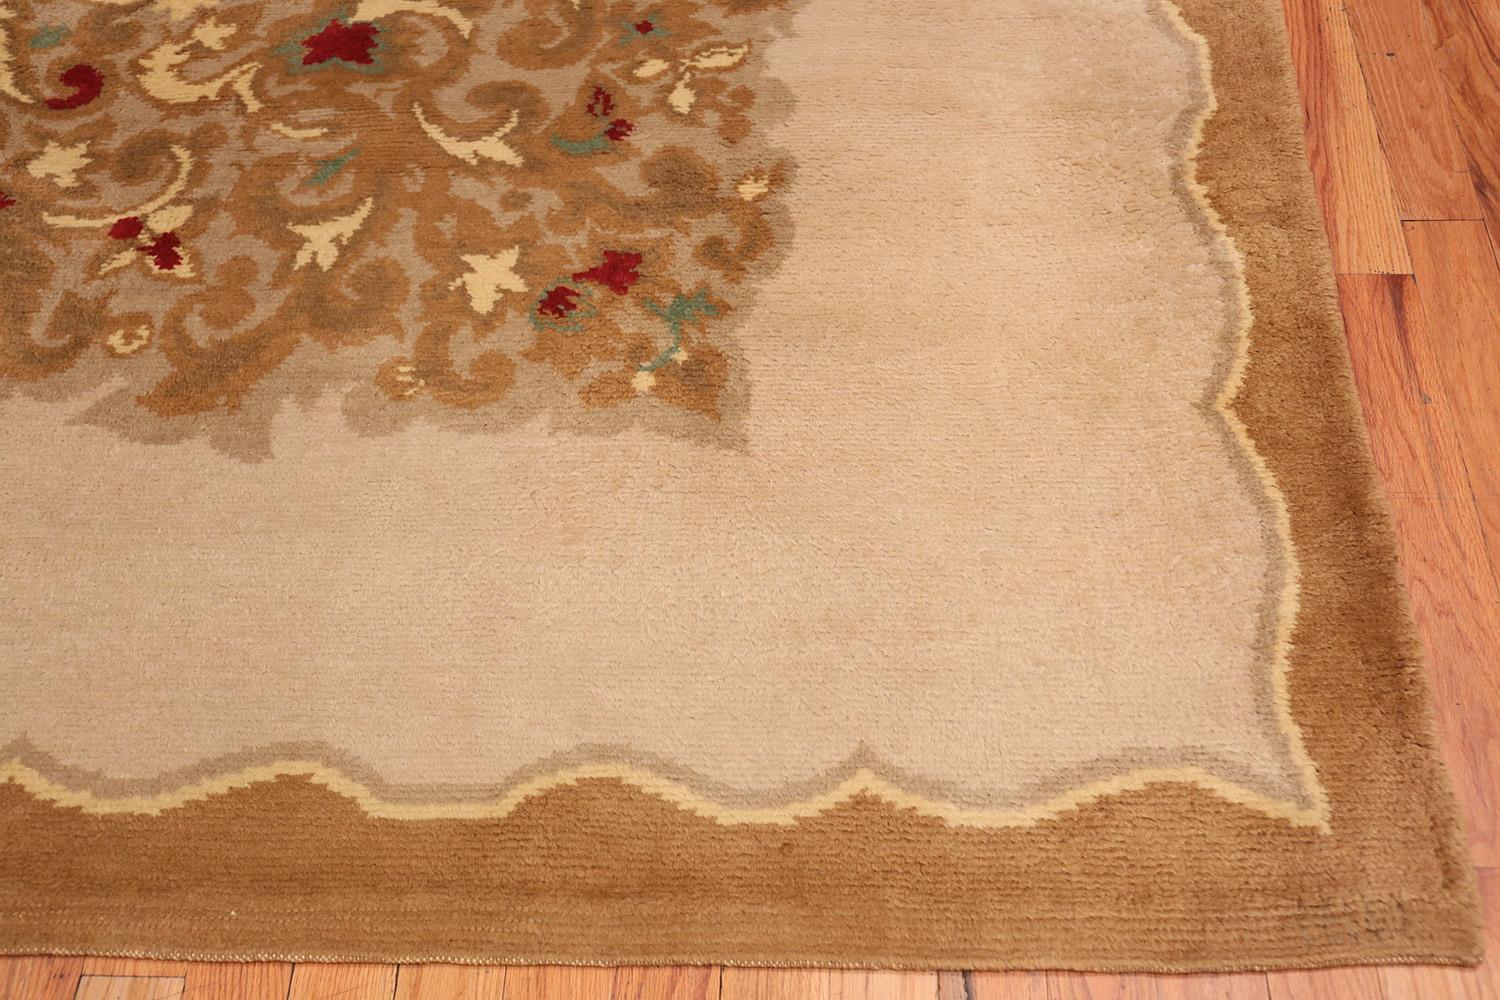 Early 20th Century Nazmiyal Antique French Room Size Art Deco Rug. Size: 9 ft 10 in x 11 ft 7 in